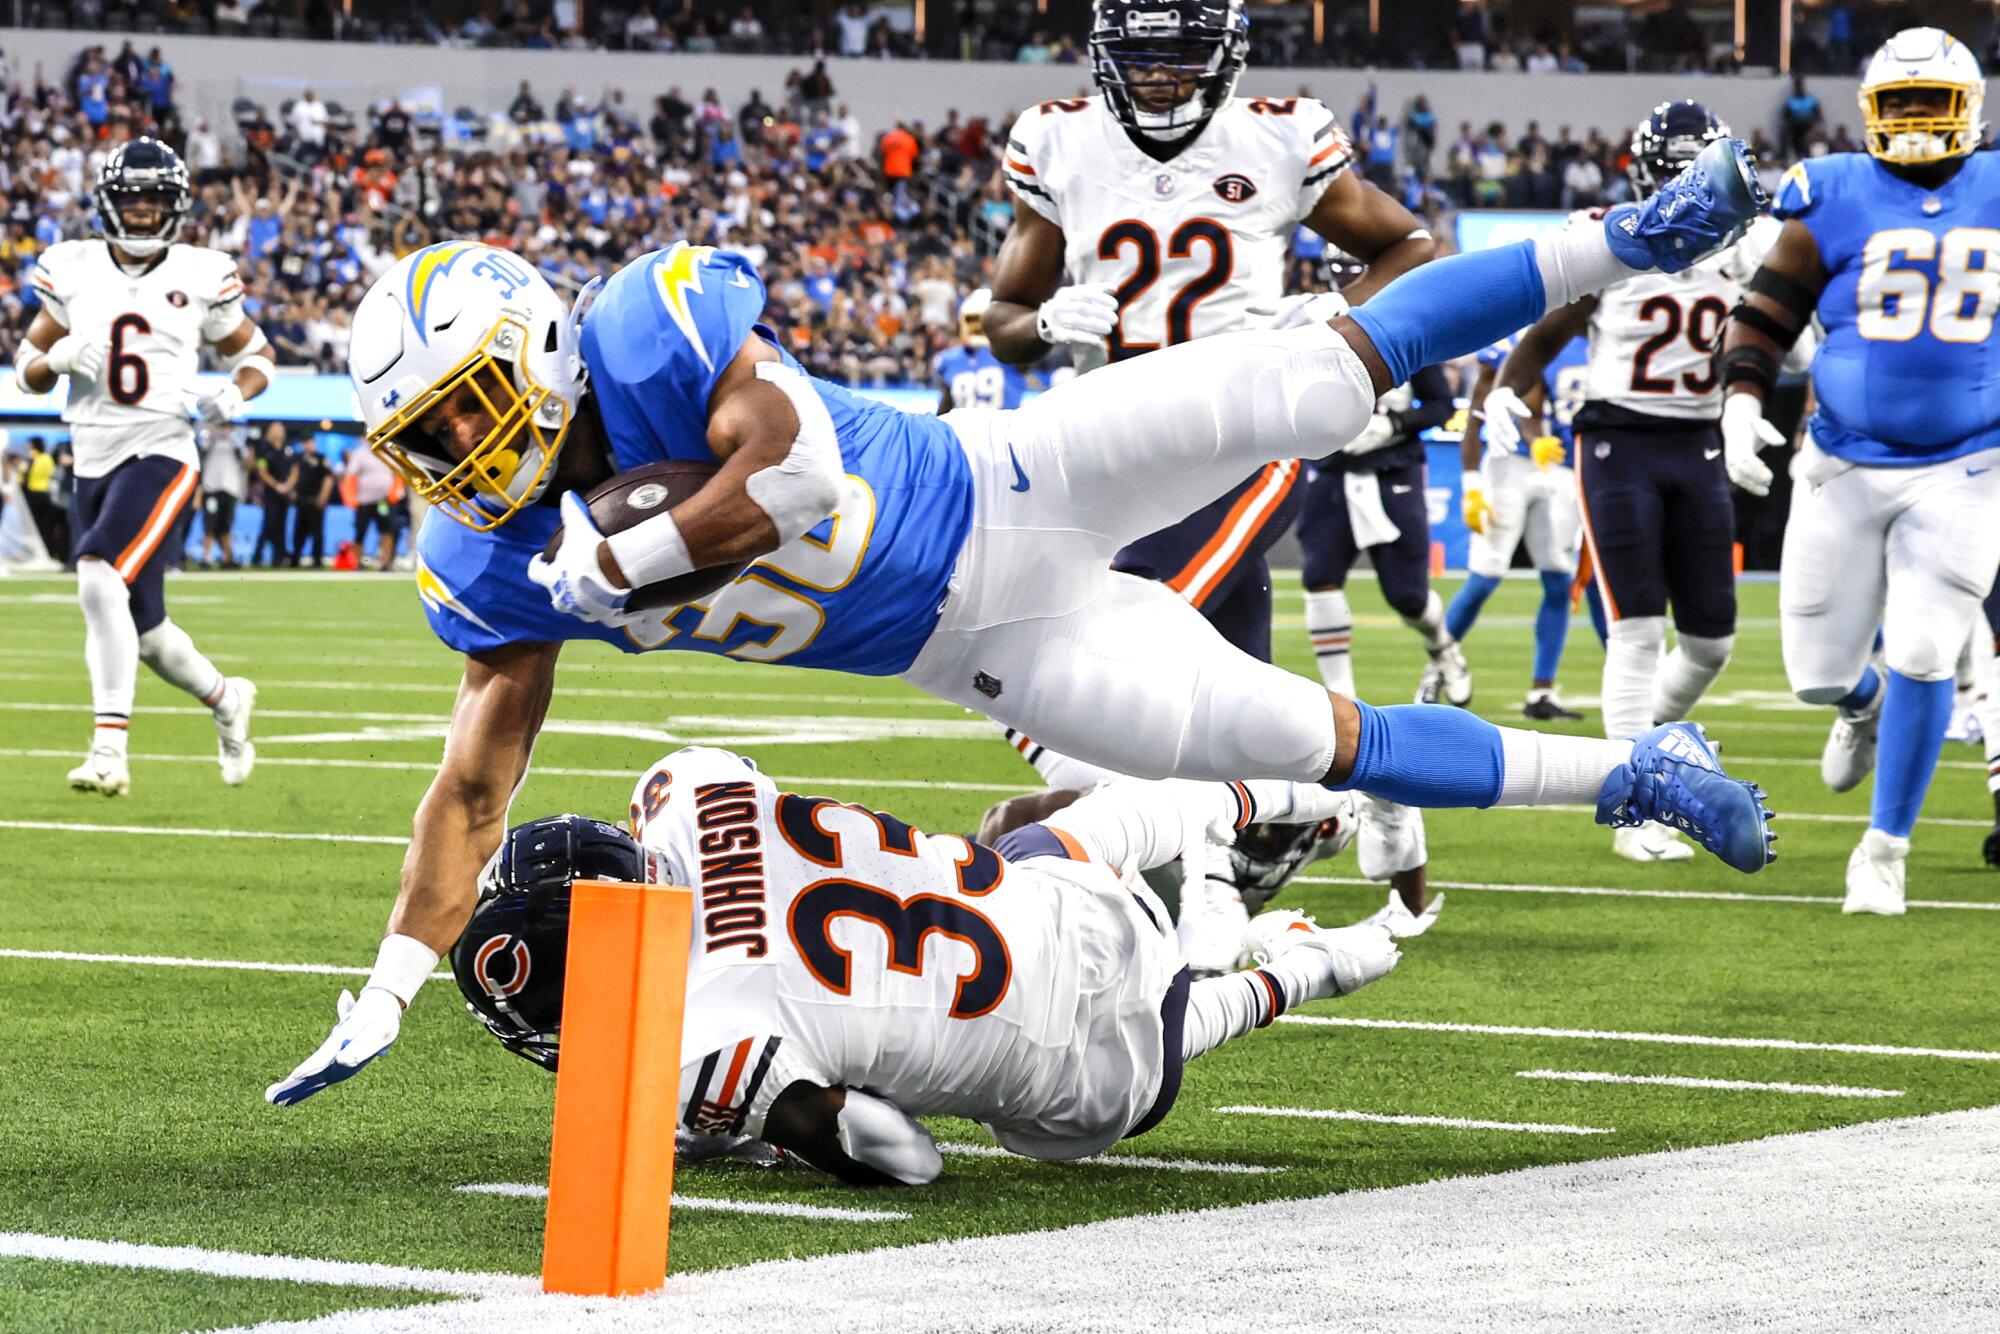 Los Angeles Chargers running back Austin Ekeler (30) dives over the end zone pylon to score a first quarter touchdown.